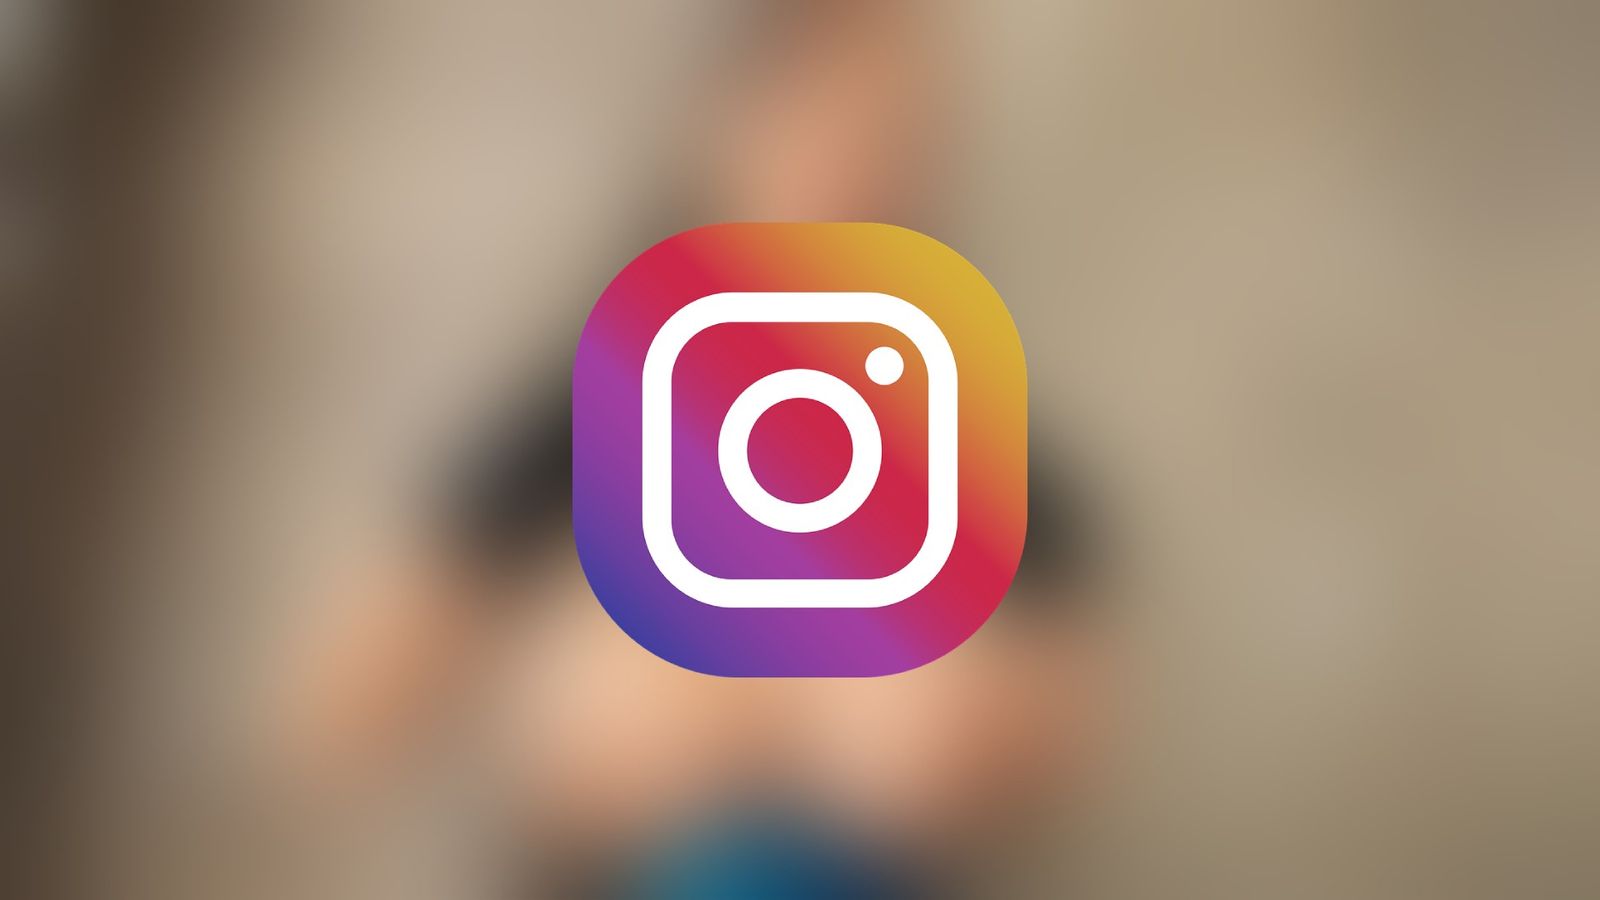 Instagram logo with a blurred background featuring explicit pornographic content.